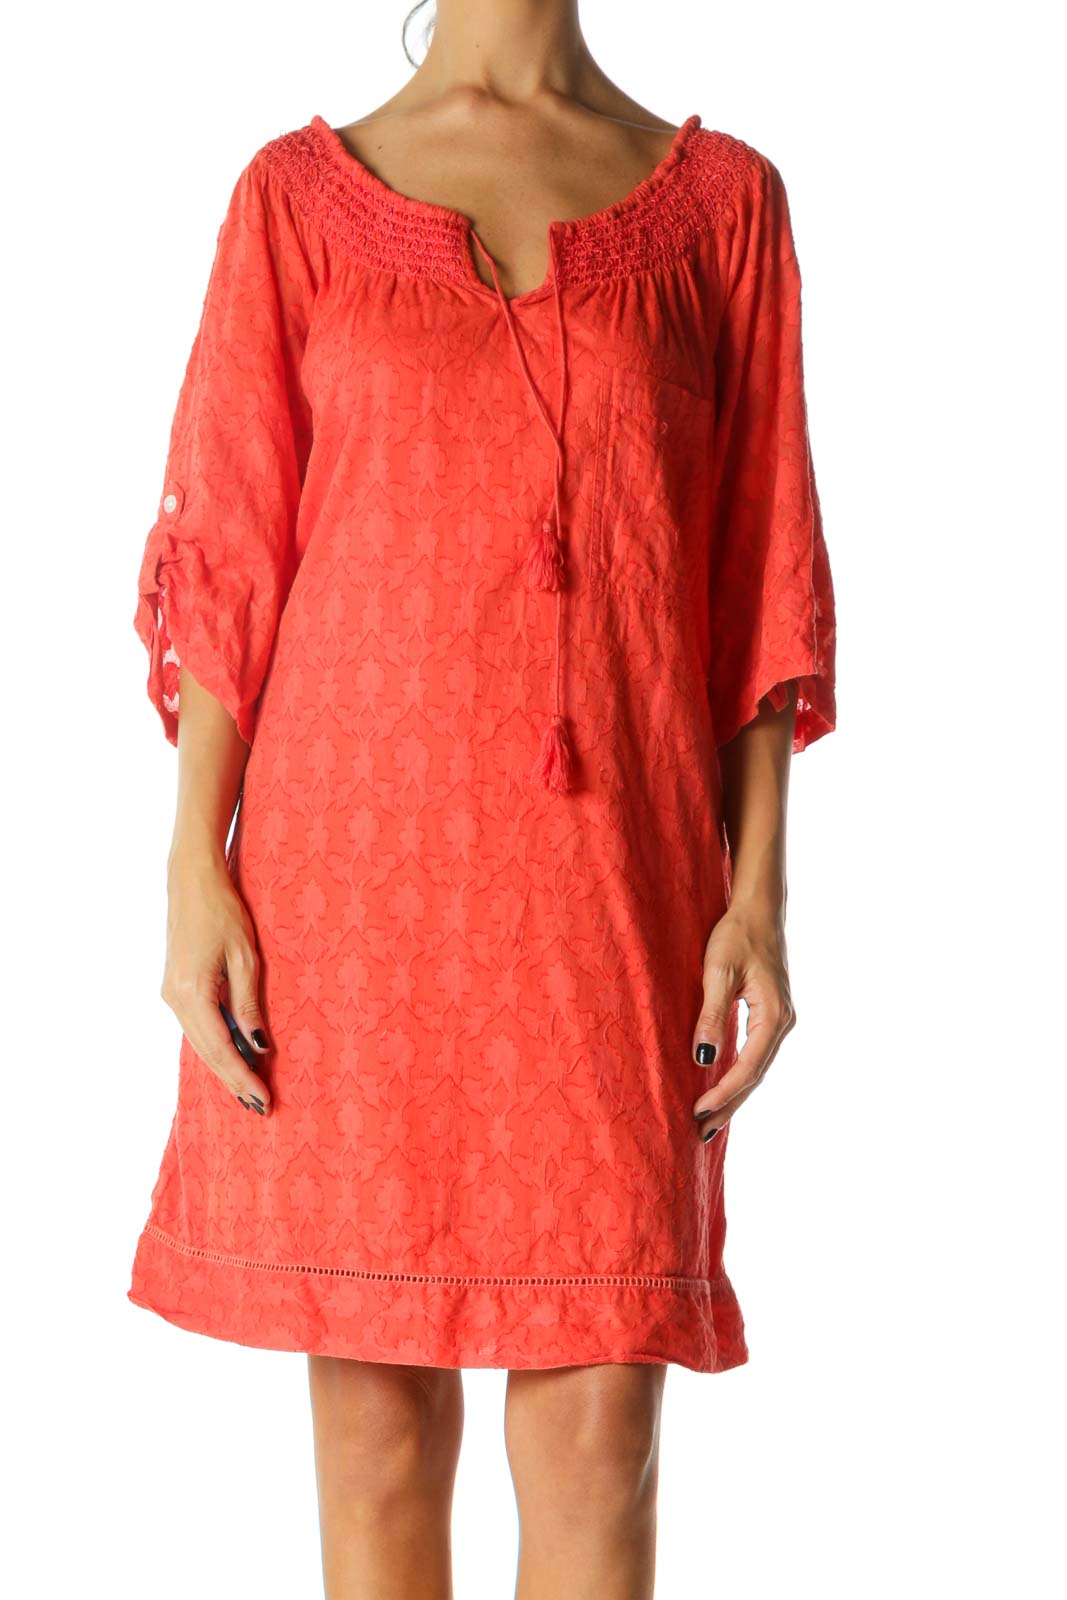 Coral-Orange 100% Cotton Pocketed Textured Dress Front